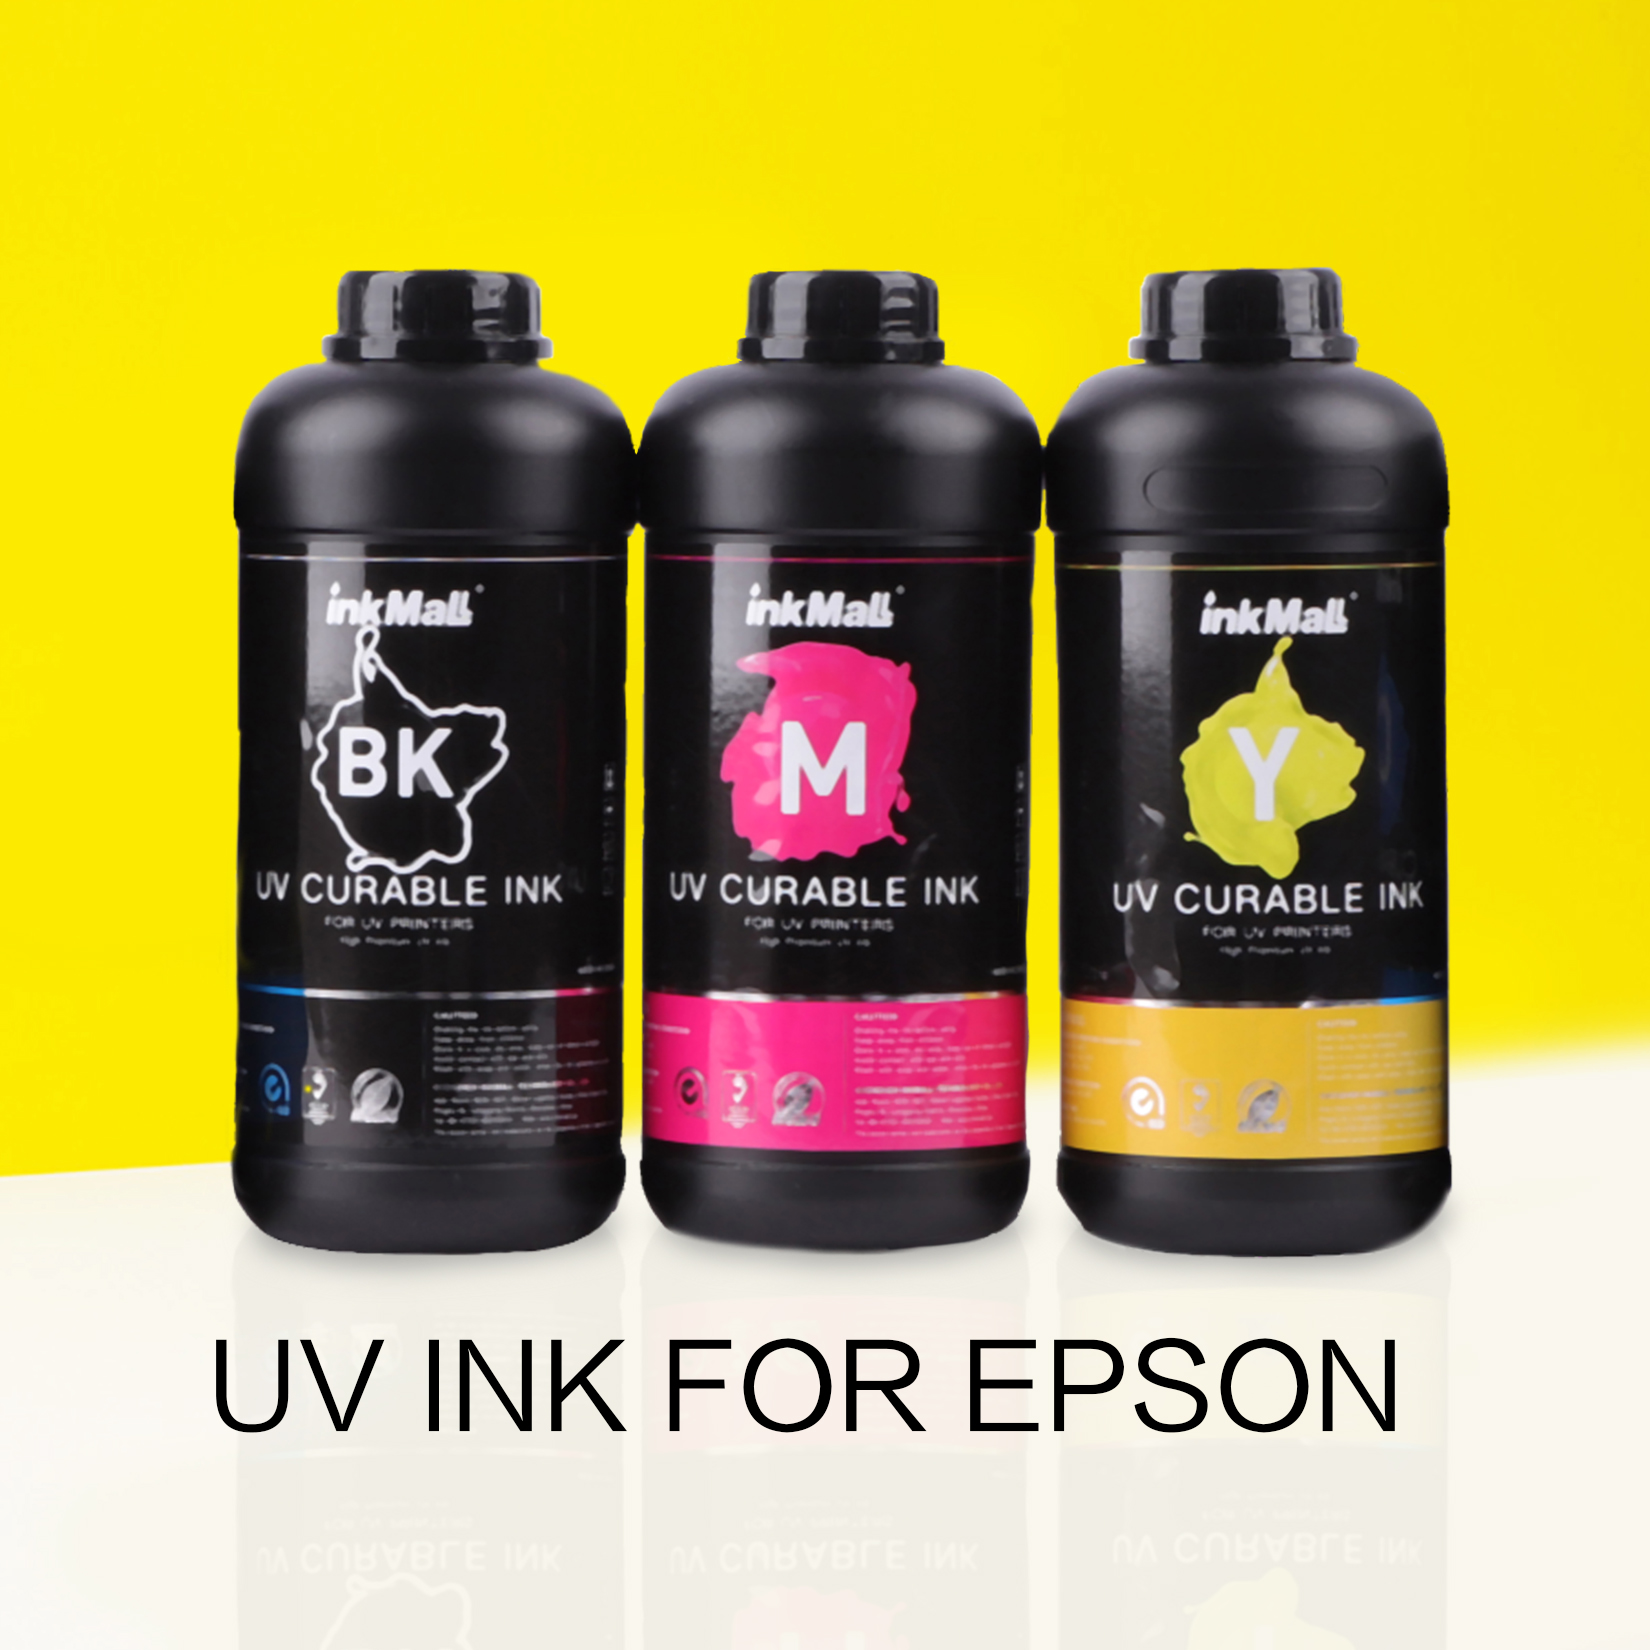 UVEP InkMall UV ink for Epson DX5